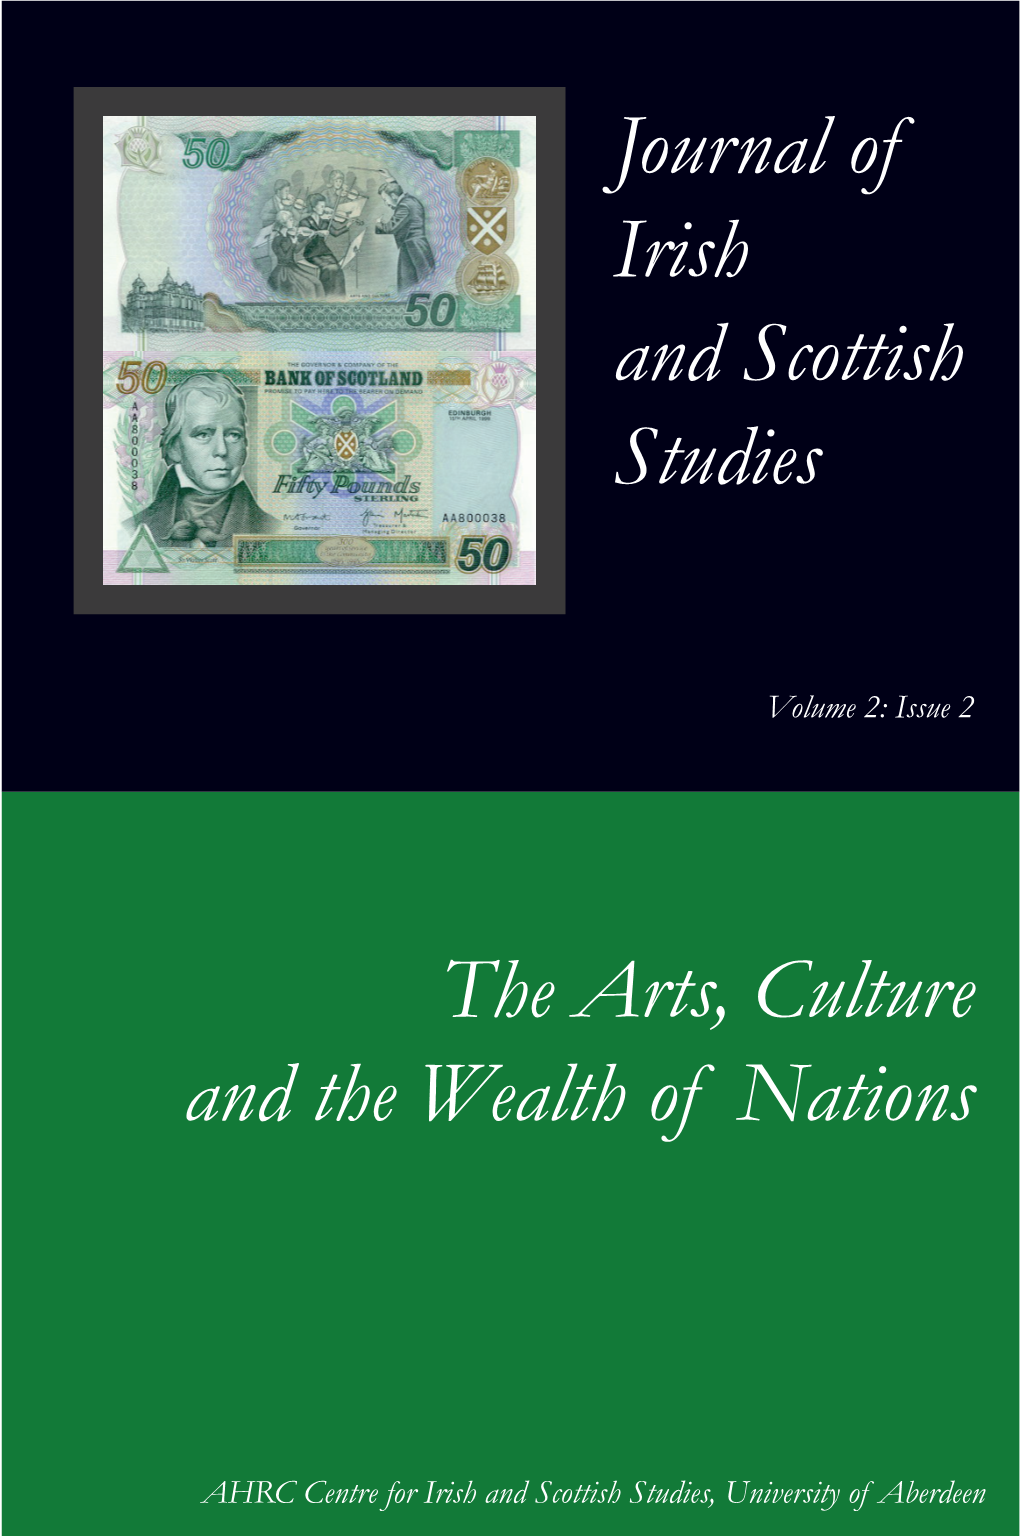 The Arts, Culture and the Wealth of Nations Journal of Irish and Scottish